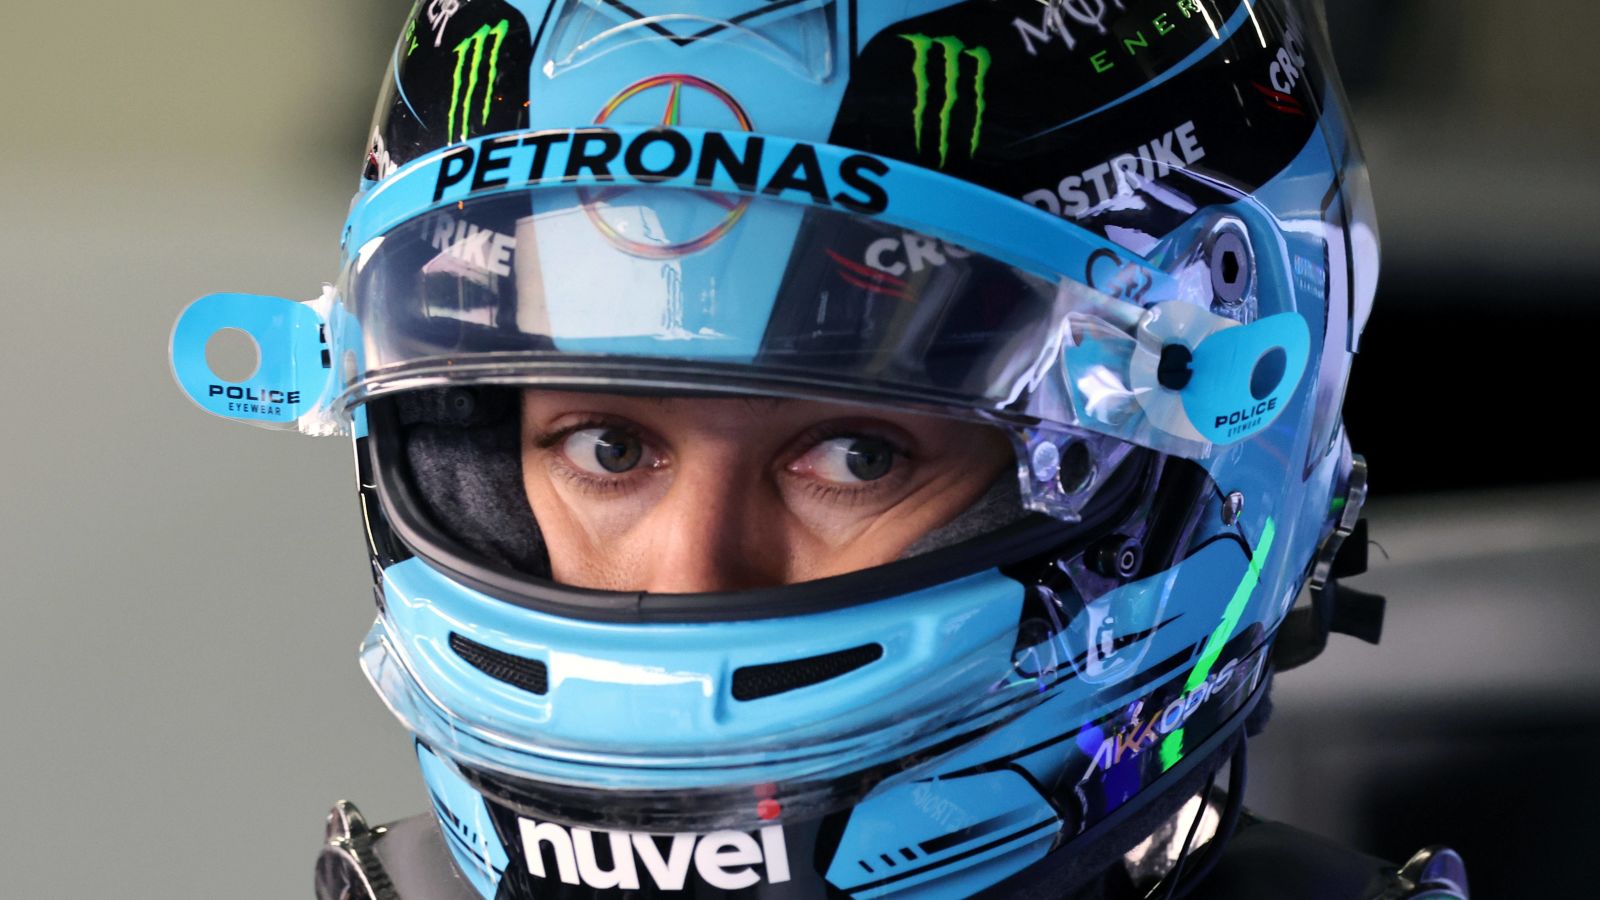 Mercedes driver George Russell looks tense ahead of the Austrian Grand Prix sprint race. Styria, July 2023.